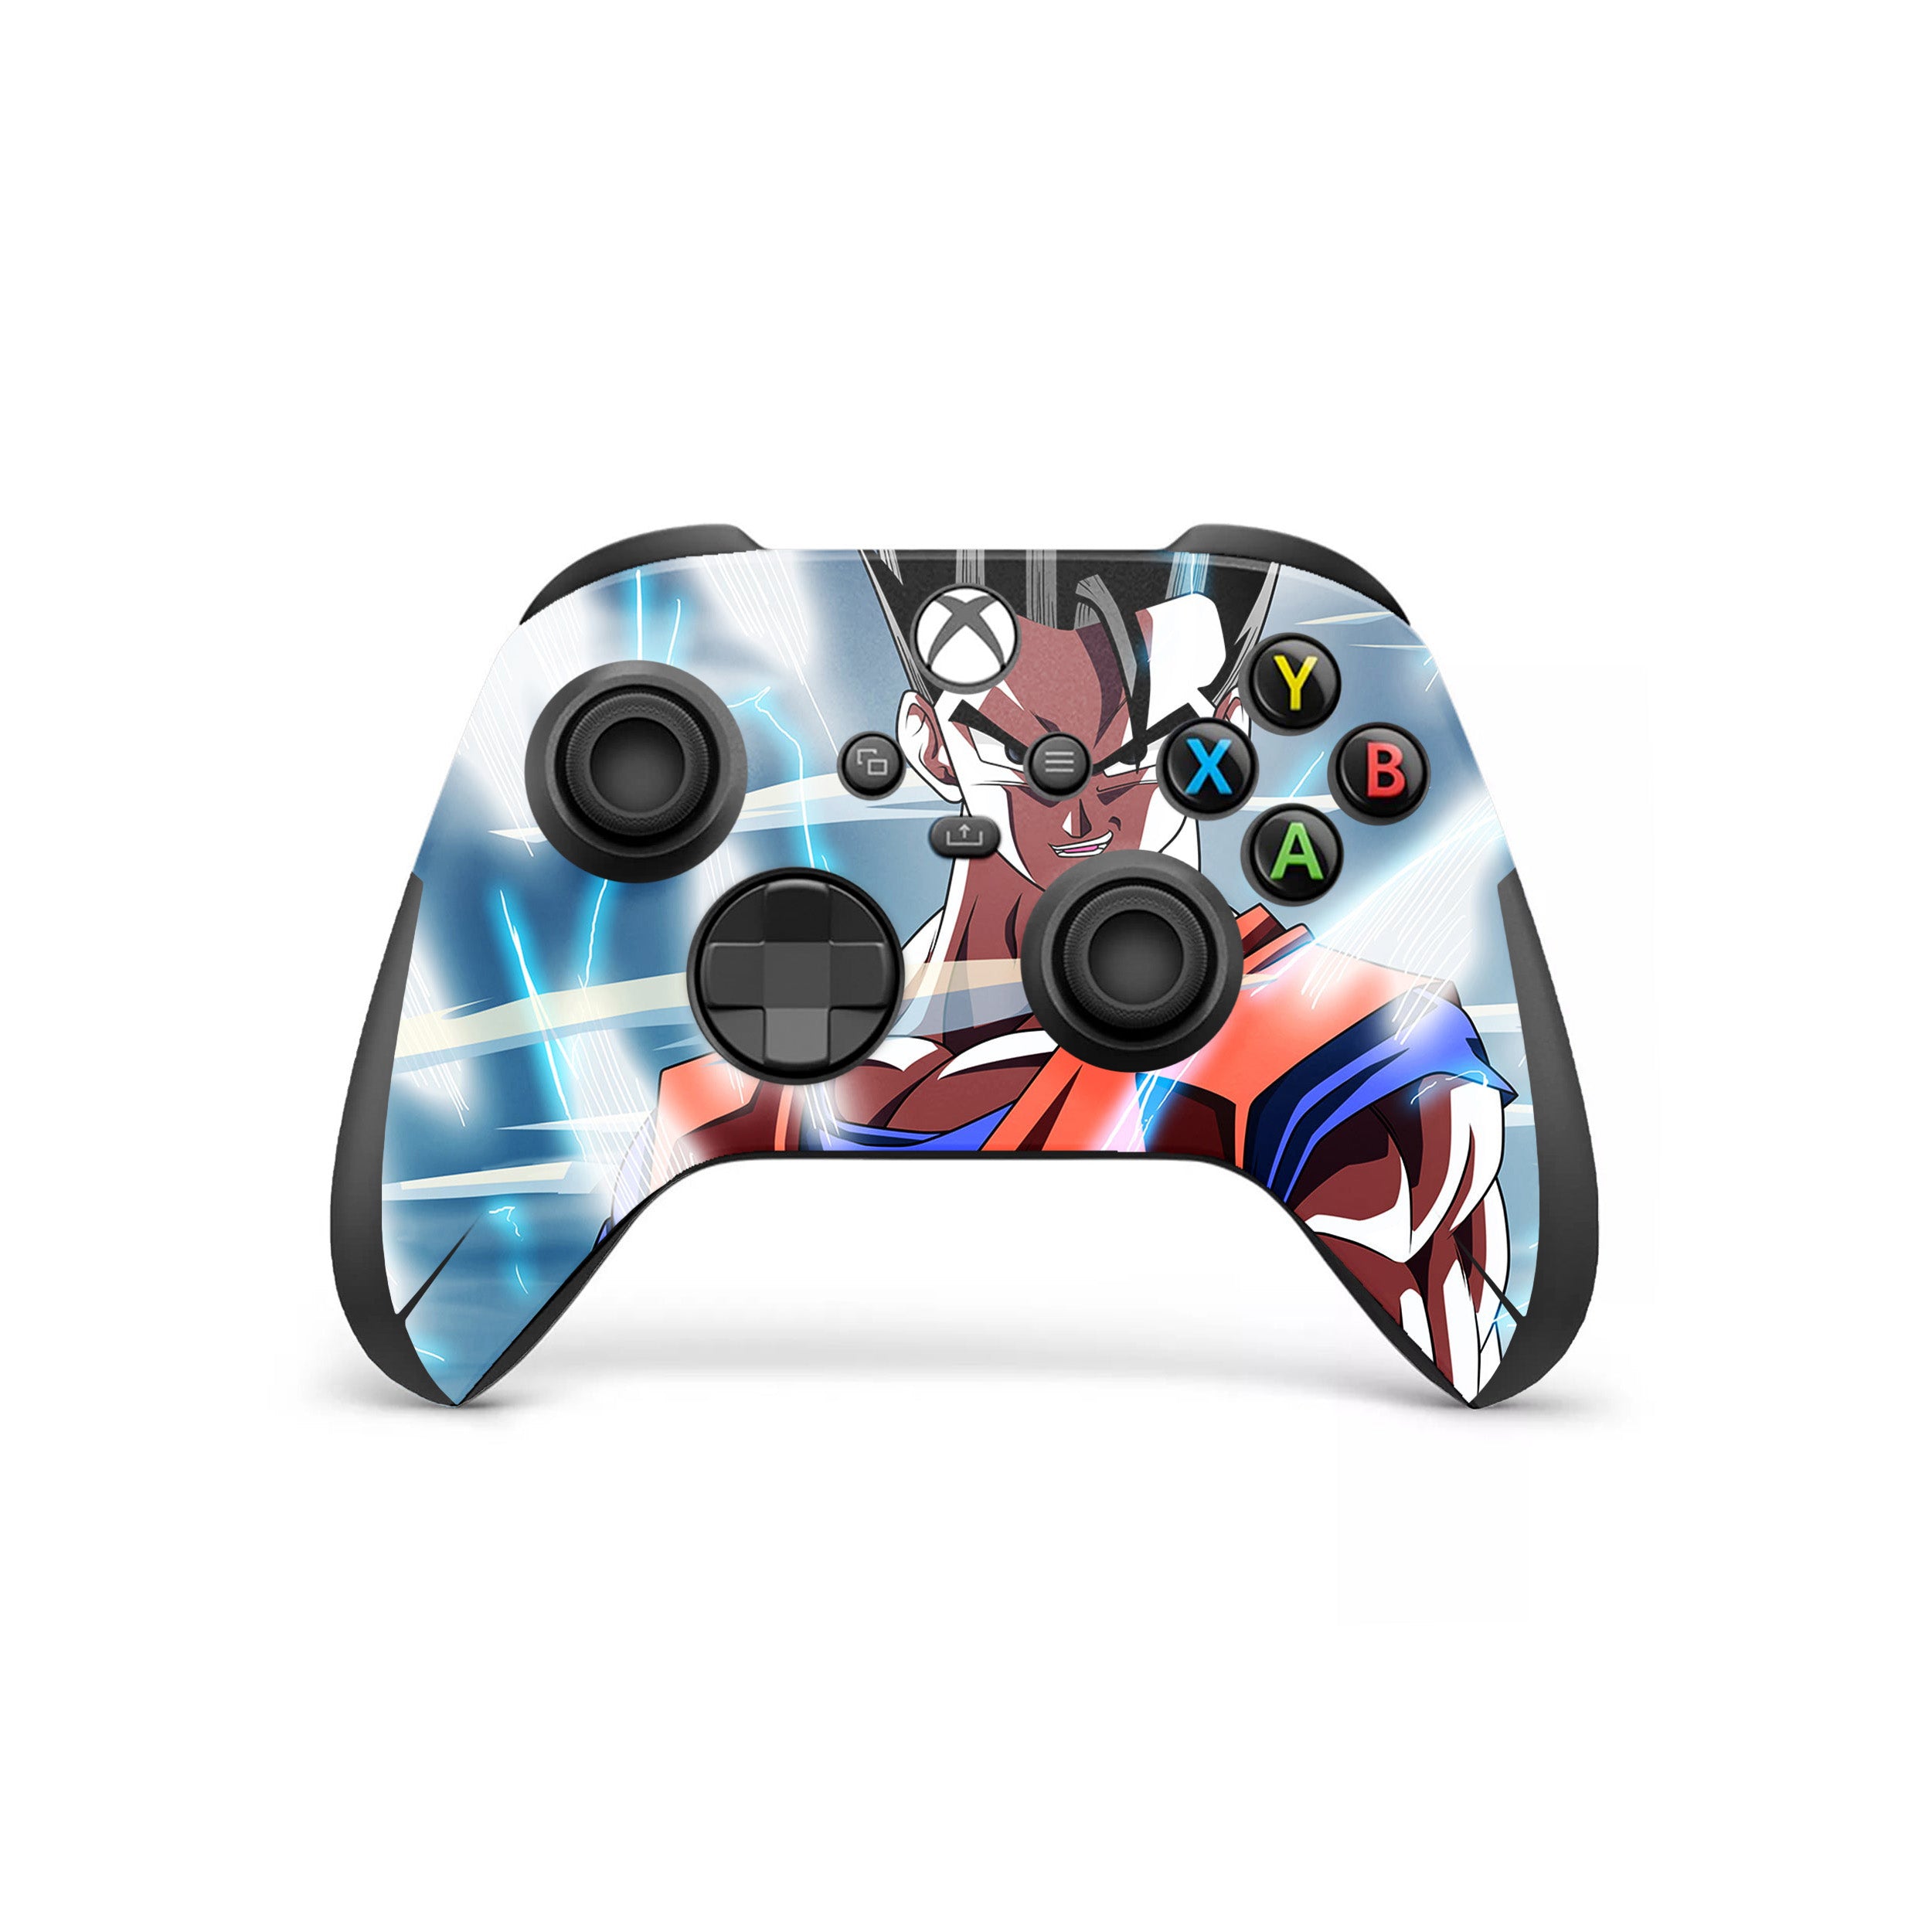 A video game skin featuring a Dragon Ball Z Gohan design for the Xbox Wireless Controller.